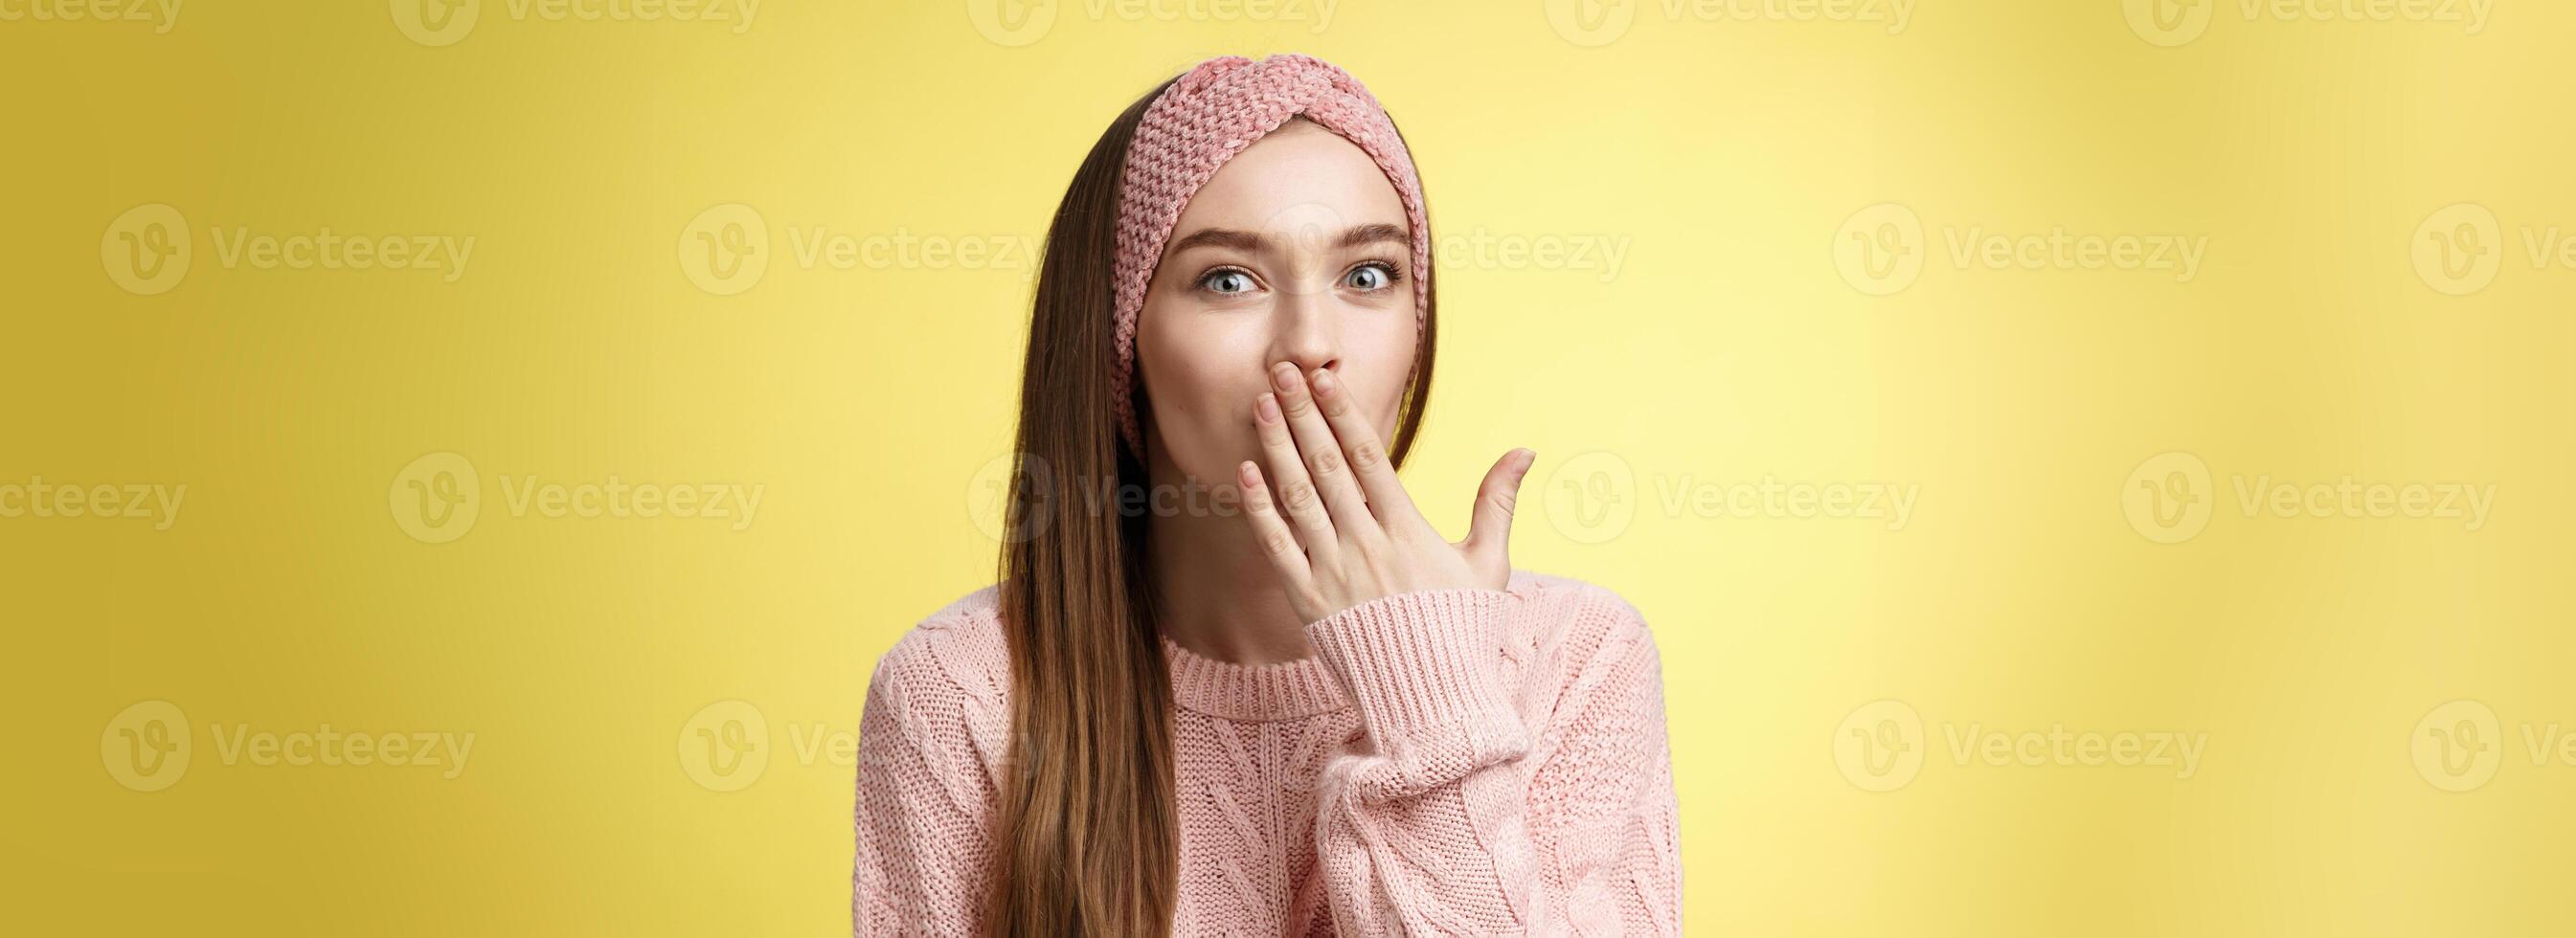 Talkative young cute office worker wearing sweater, knitted headband holding palm on mouth surprised and amazed, learning interesting shocking rumor, gossiping entertained over yellow wall photo